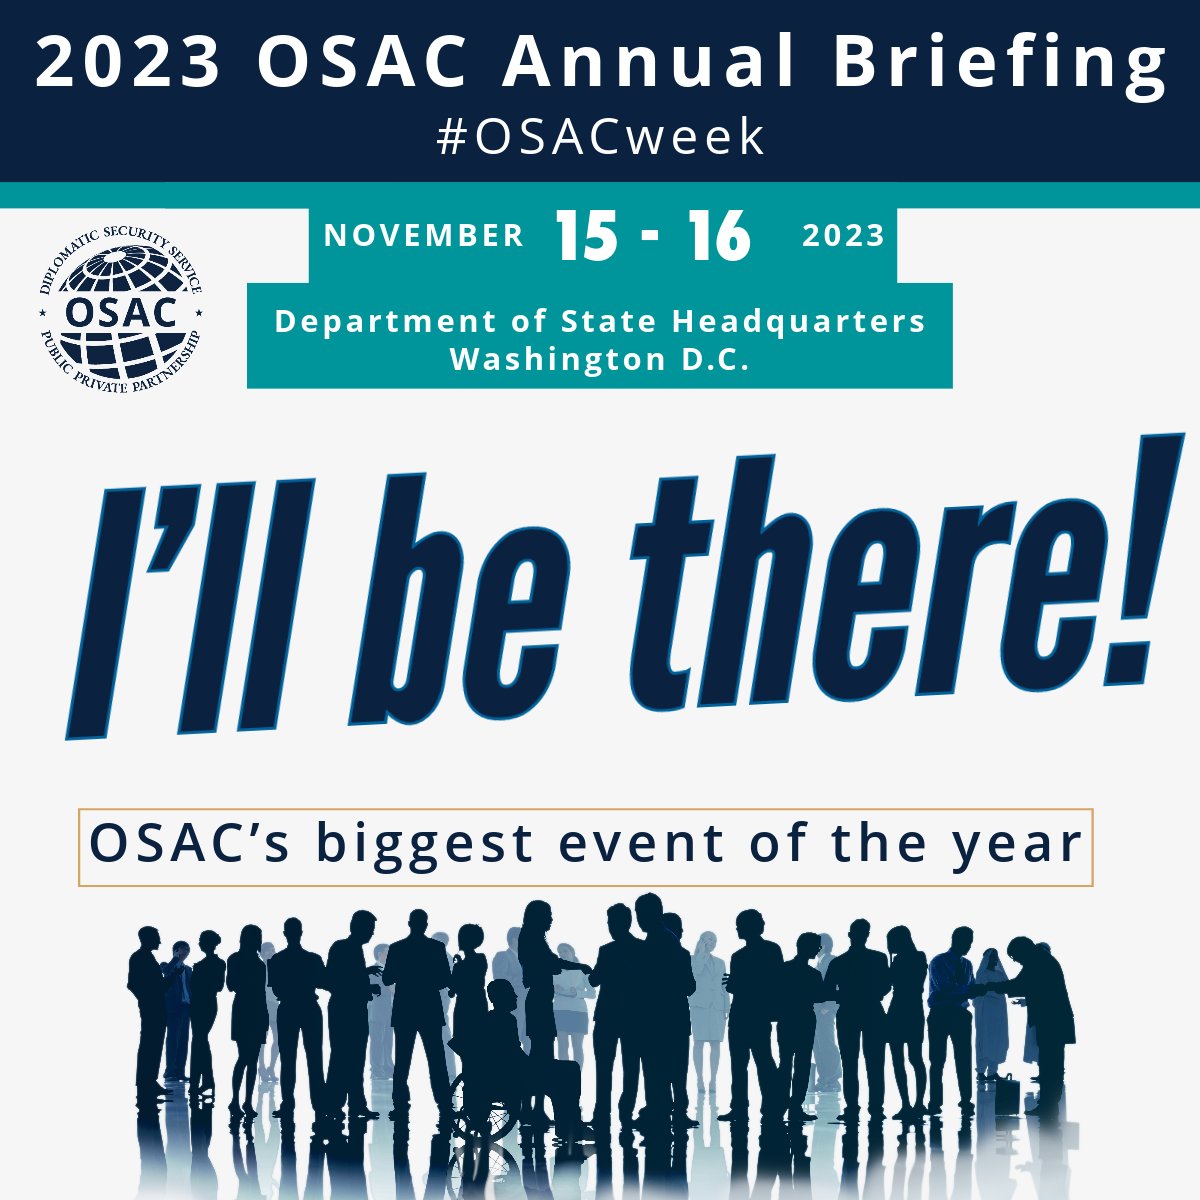 We are excited to be attending this years OSAC Annual Briefing at the State Department headquarters.